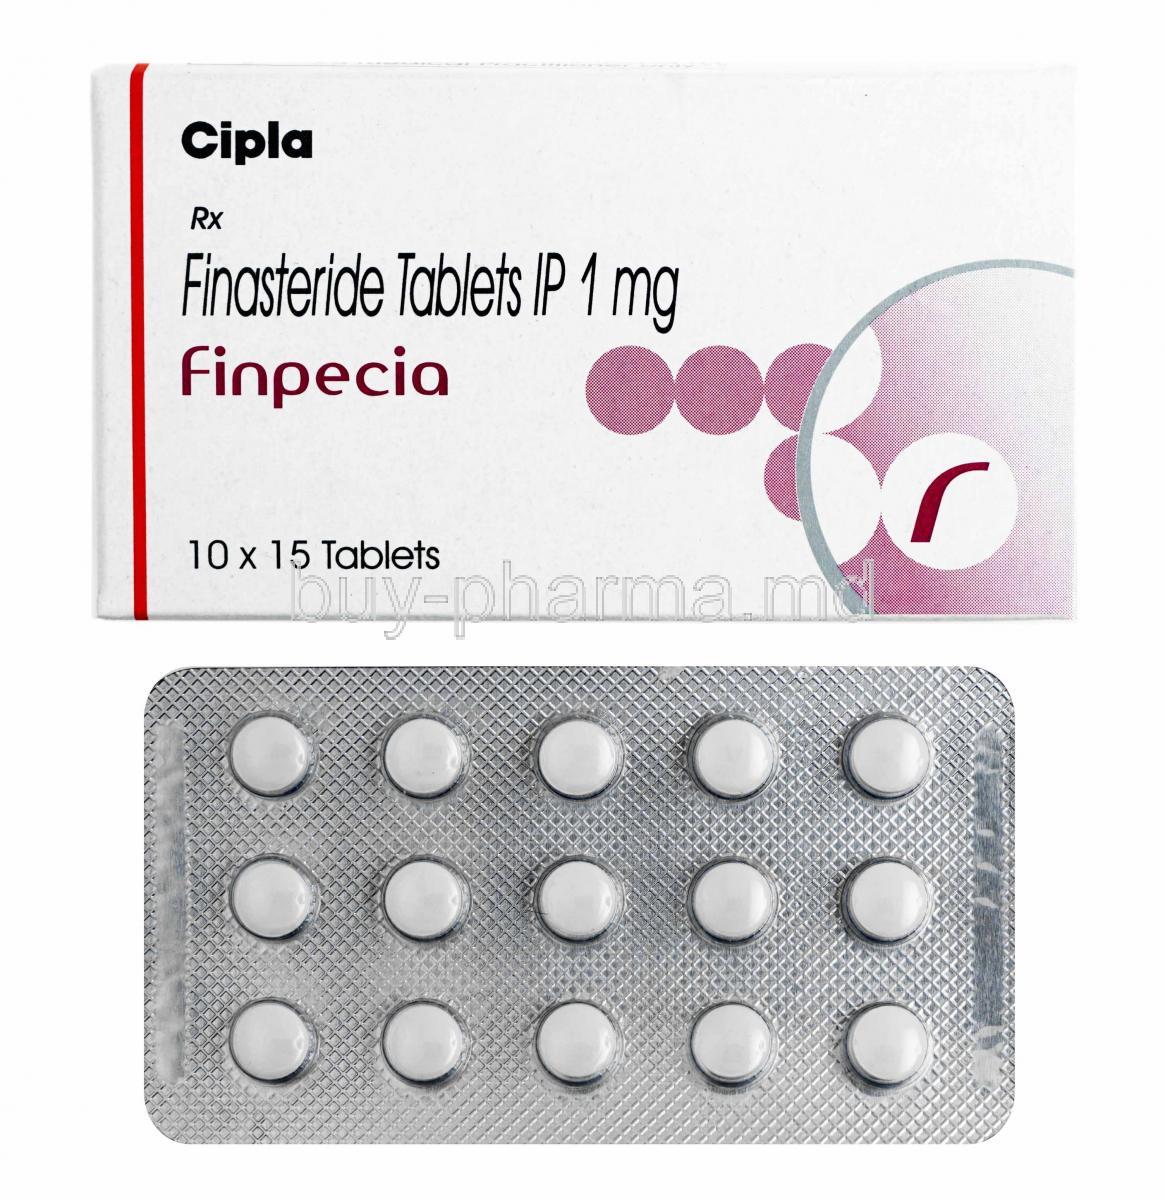 Finpecia, Finasteride box and tablets